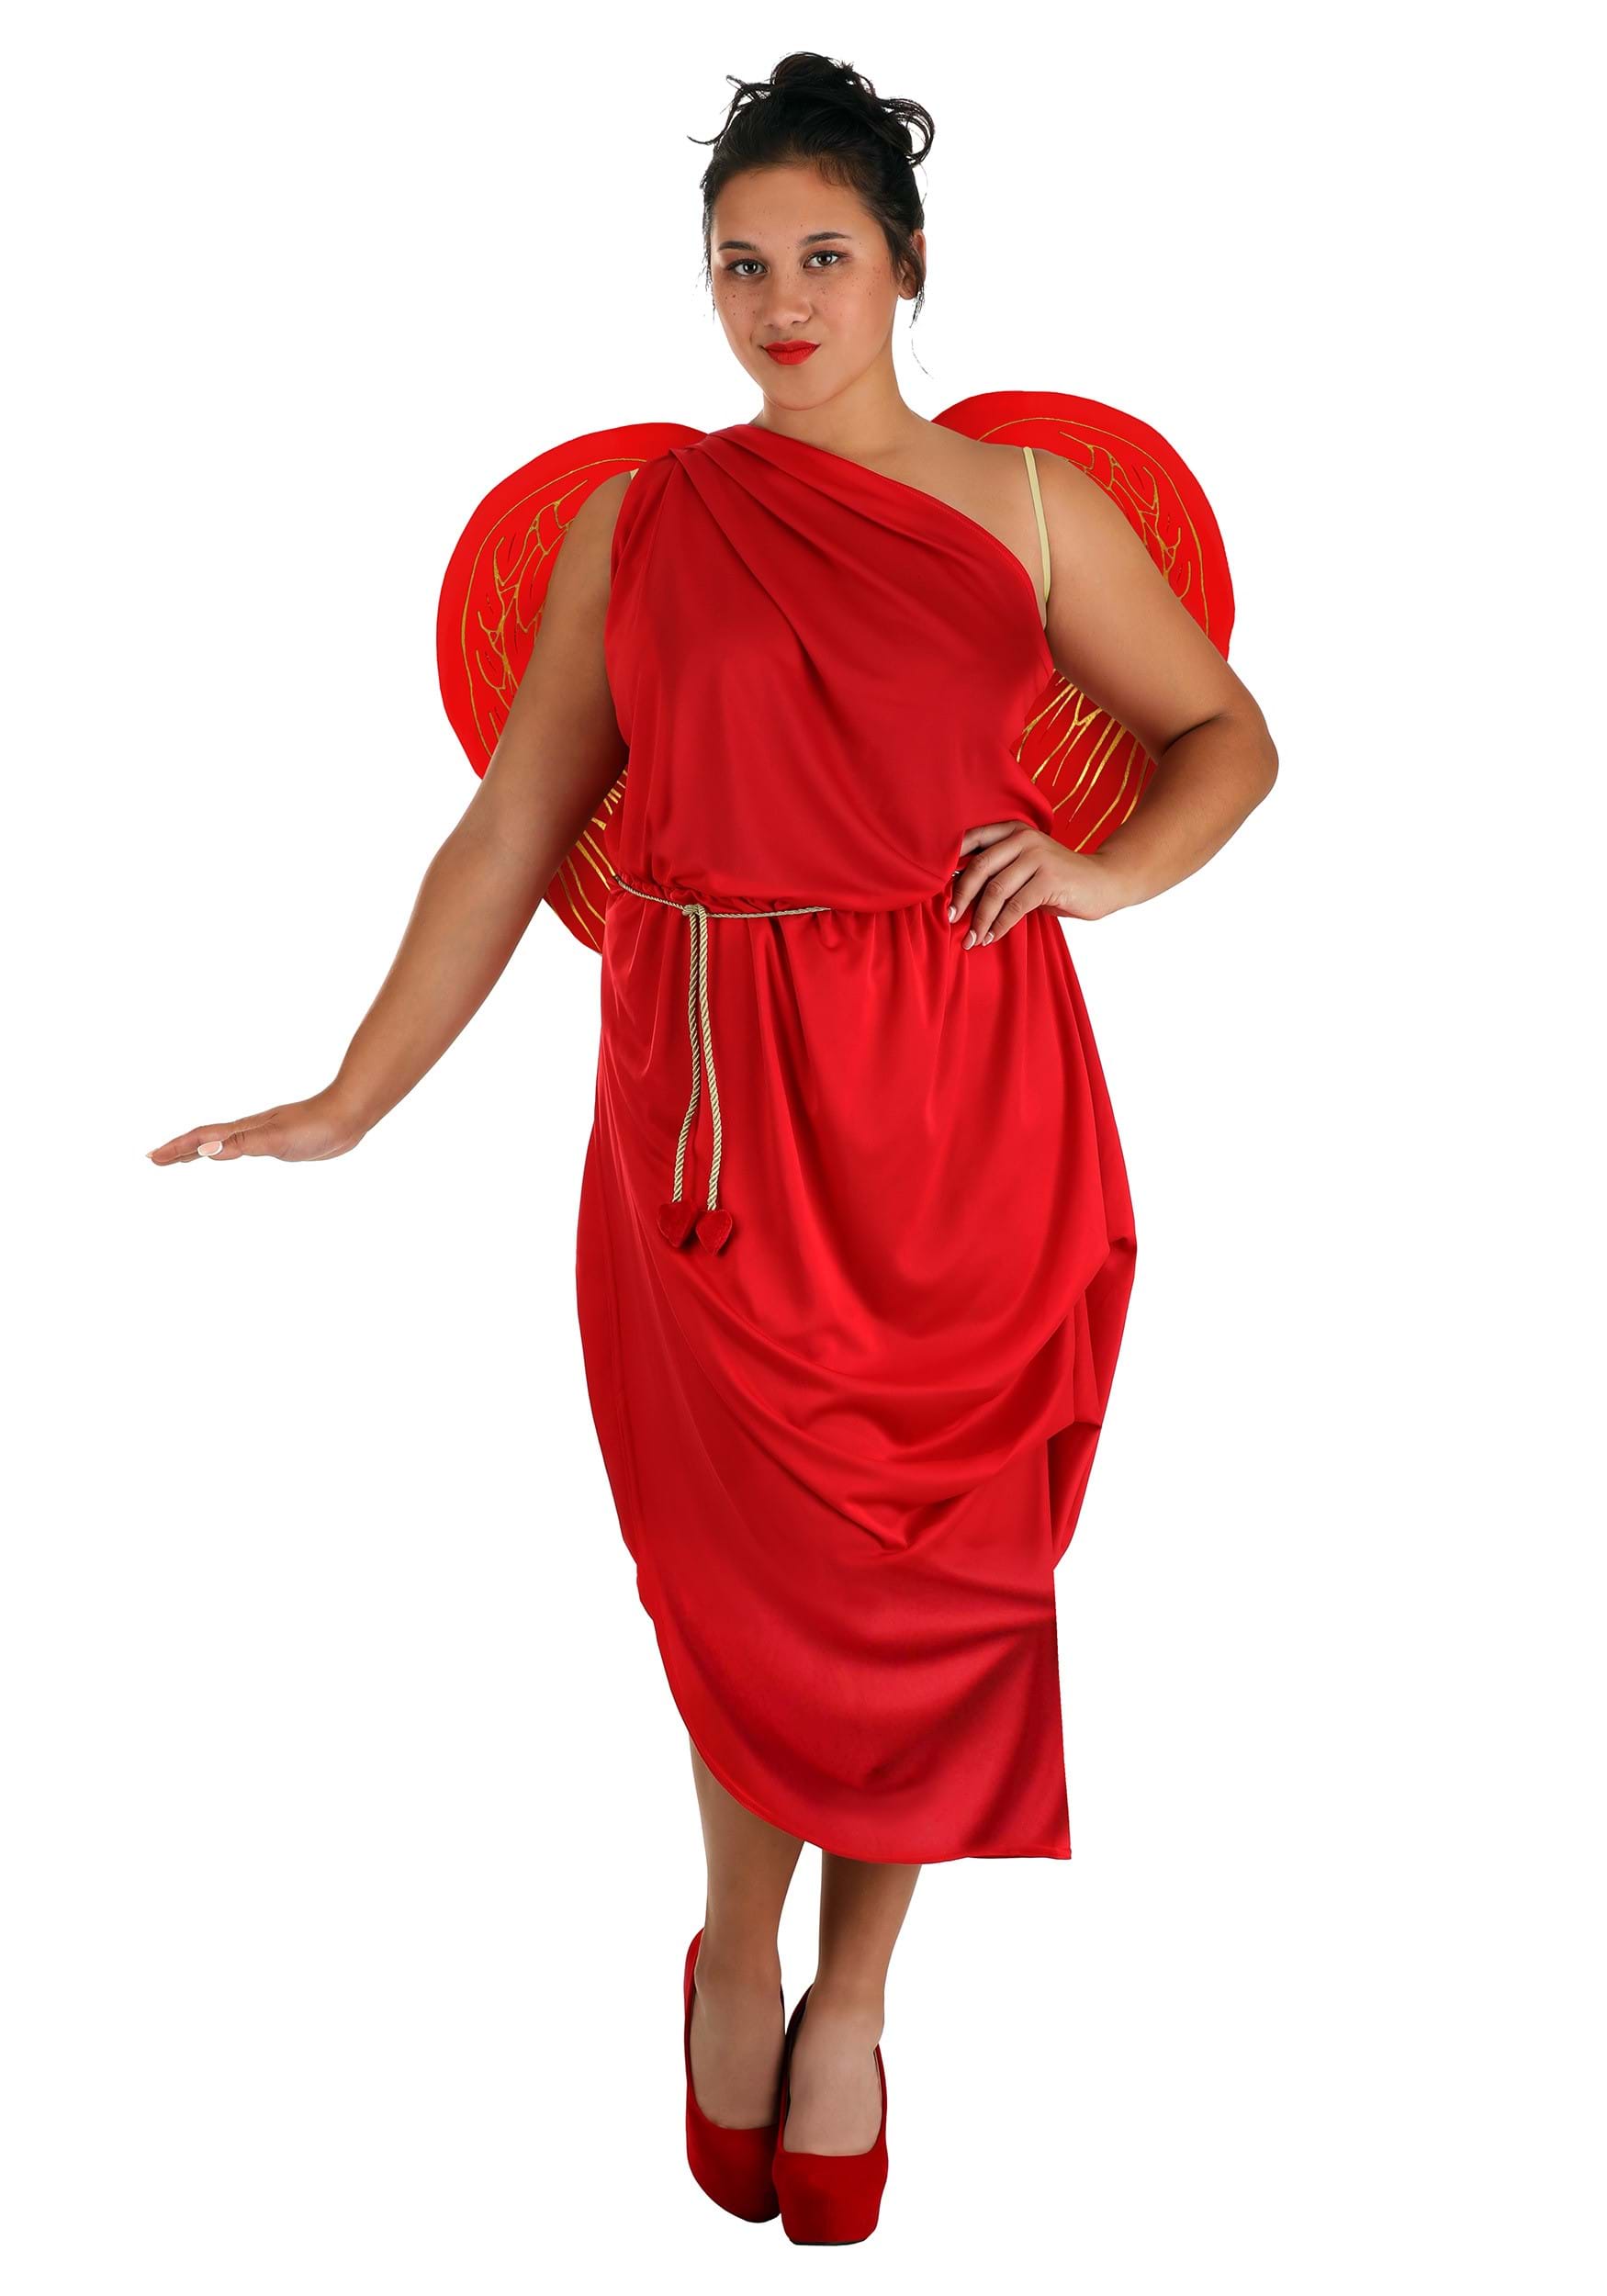 Plus Size Cupid Costume Dress for Women